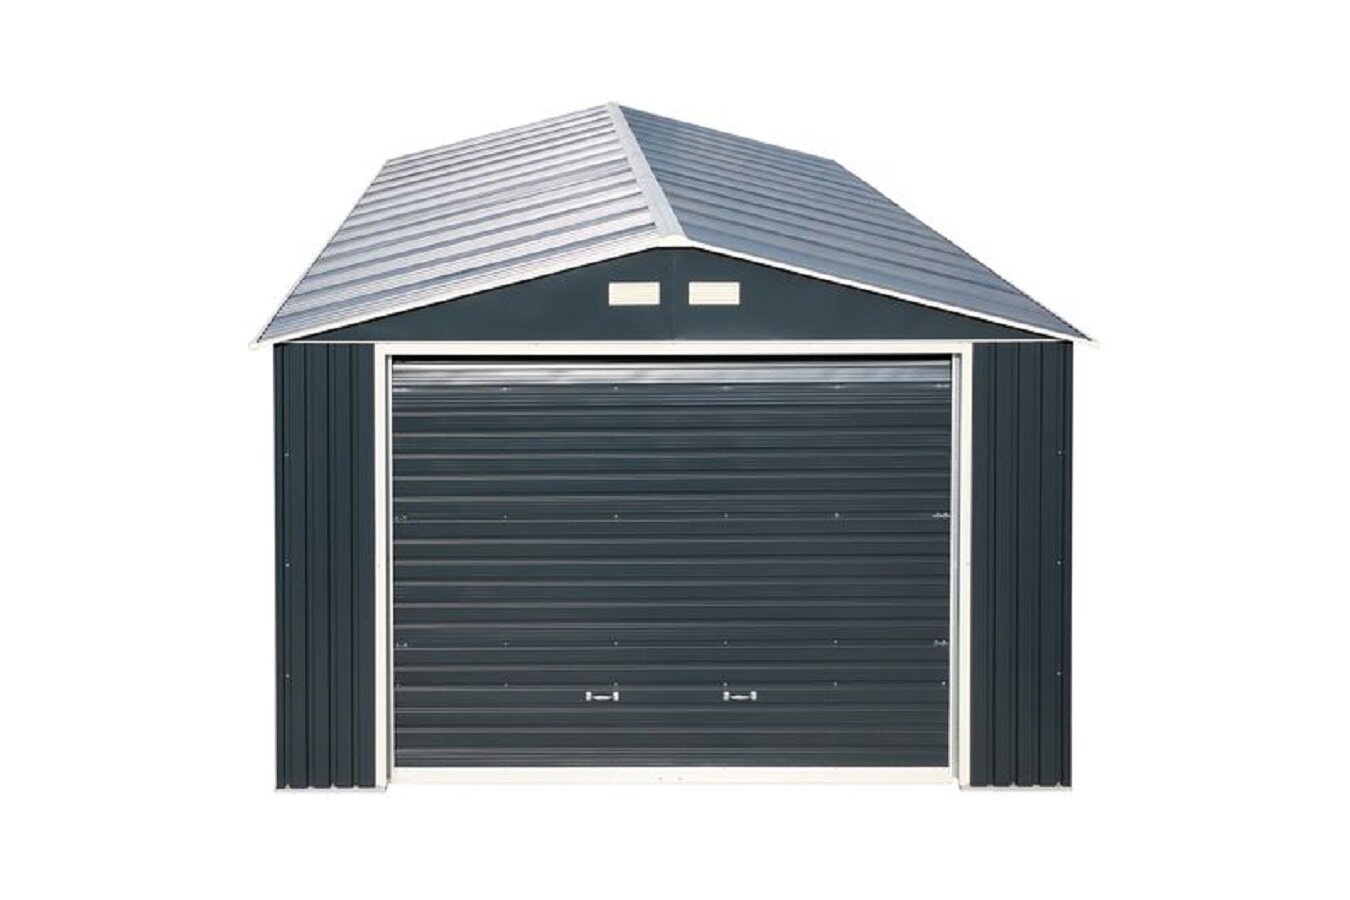 Duramax Imperial 12 Ft W X 20 Ft D Metal Garage Shed Reviews